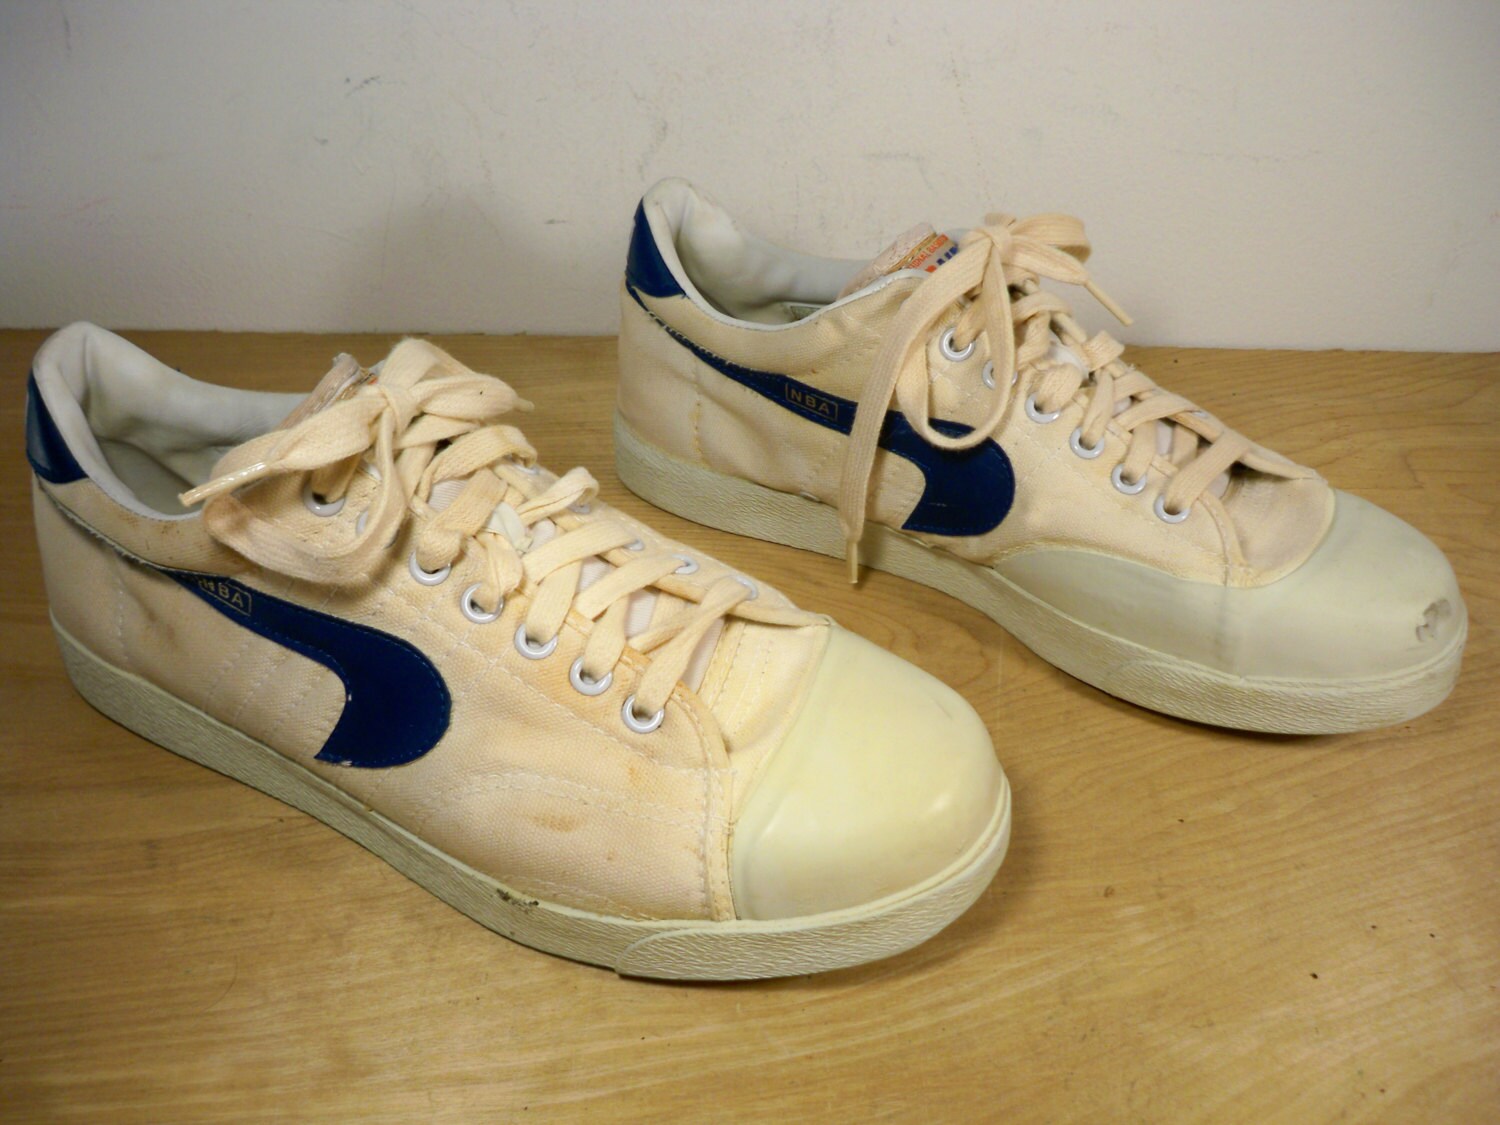 Vintage NBA Choice of the Pros Low Top Basketball by Joeymest